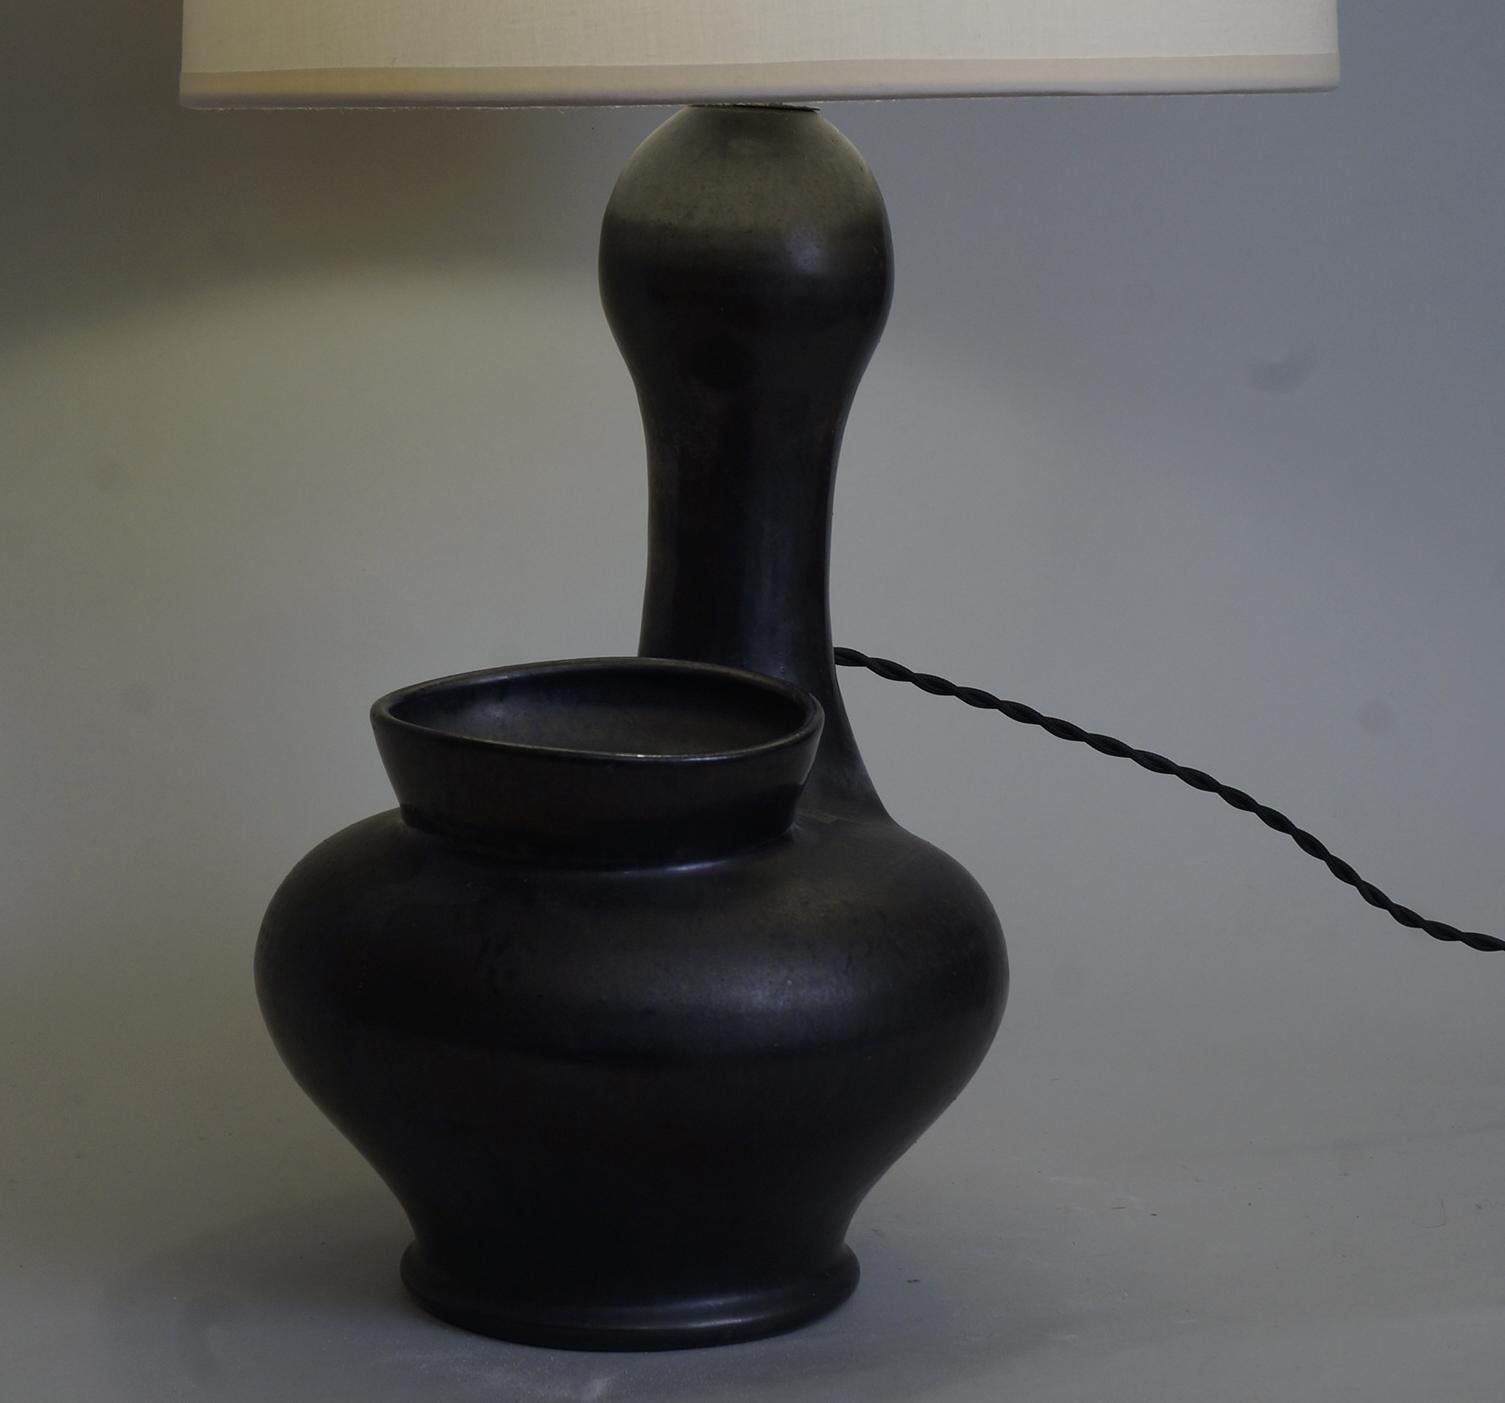 Zoomorphic black satin ceramic table lamps, custom-made fabric lampshade, rewired with twisted silk cord.

Measures: Ceramic body height 31 cm / 12.2in.
Height with lampshade: 54 cm / 21.3 in.